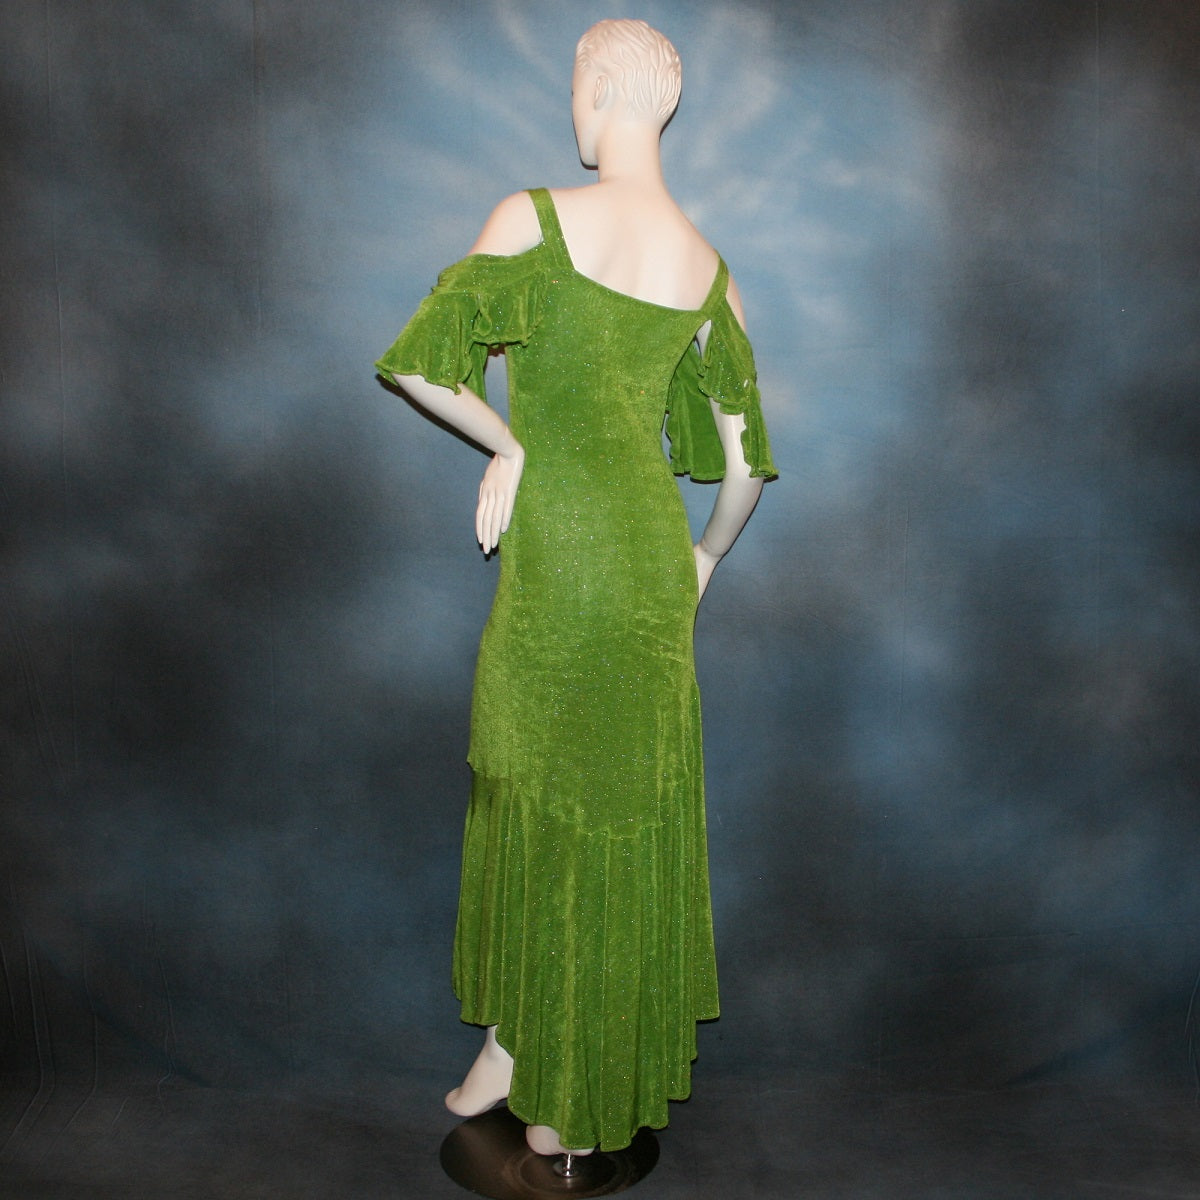 back view of Apple green social Latin/rhythm/tango dress created of apple green glitter slinky with full flared bottom skirting & cold shoulder petal flounce sleeves.